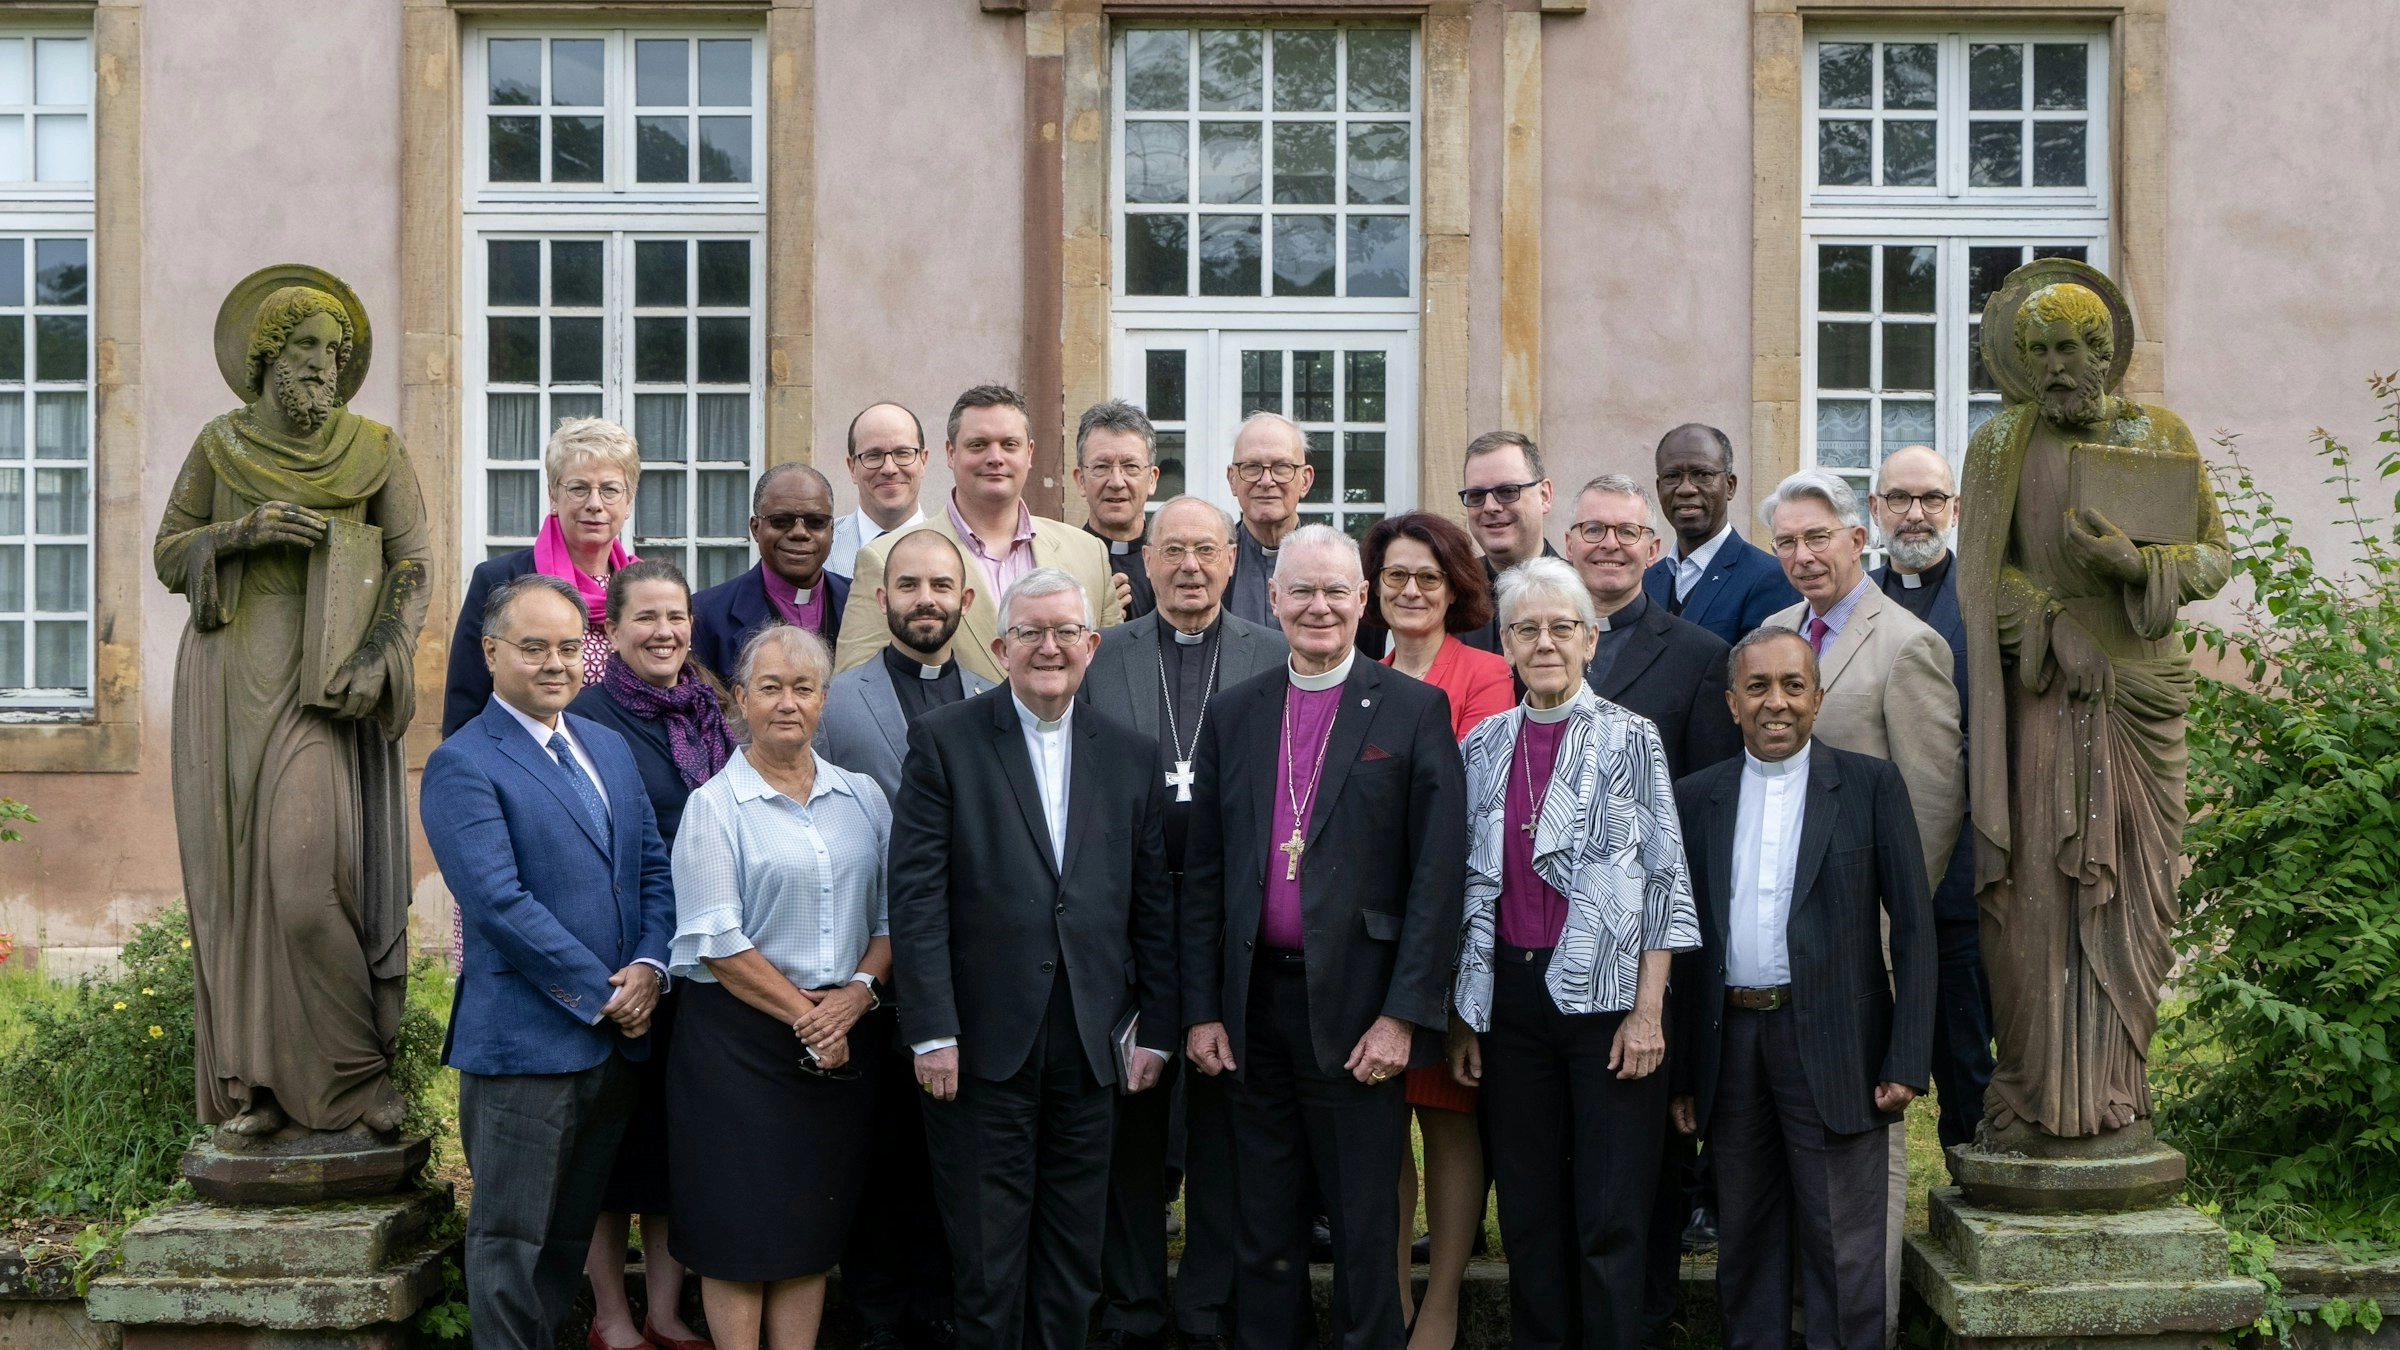 Members of the official Anglican–Roman Catholic International Commission pose for a photo during their meeting May 11-18, 2024, in Strasbourg, France. Archbishop Bernard Longley of Birmingham, England, center left, is the Catholic co-chair of the commission, and Archbishop Philip Freier of Melbourne, Australia, center right, is the Anglican co-chair